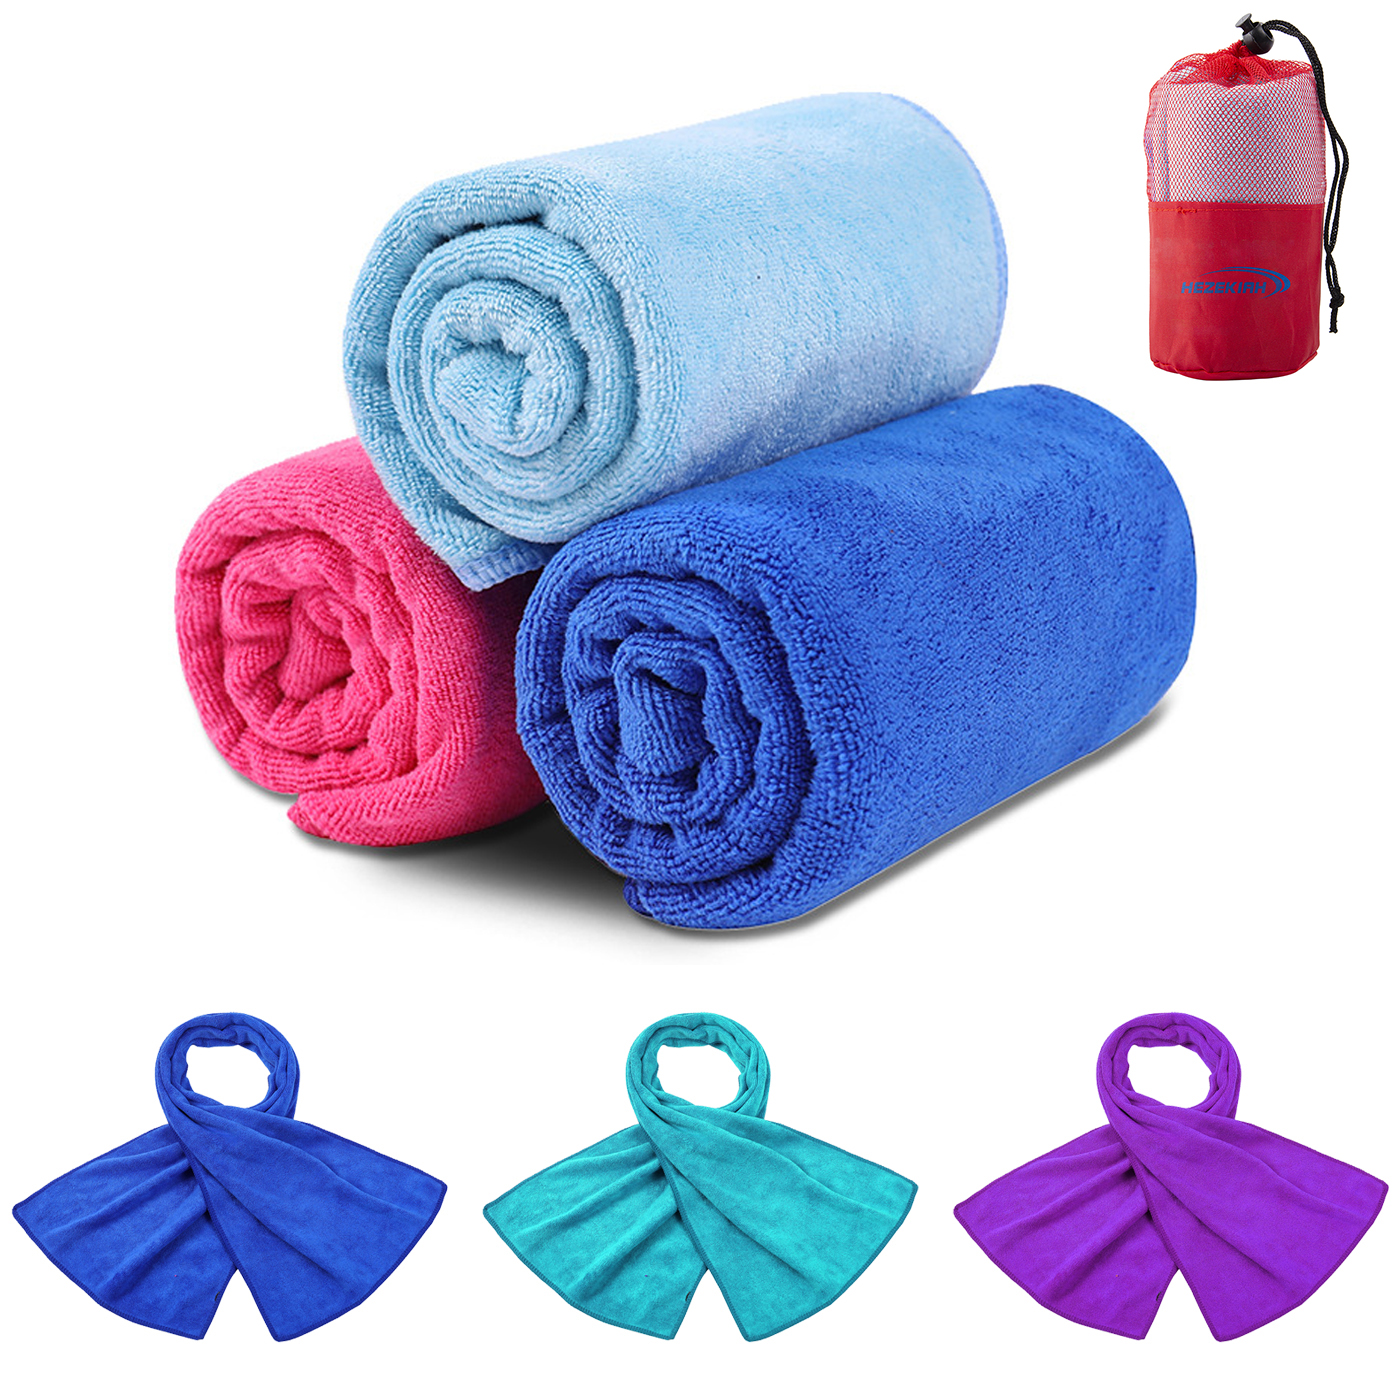 Premium Quick Dry Sports Towel With Mesh Bag